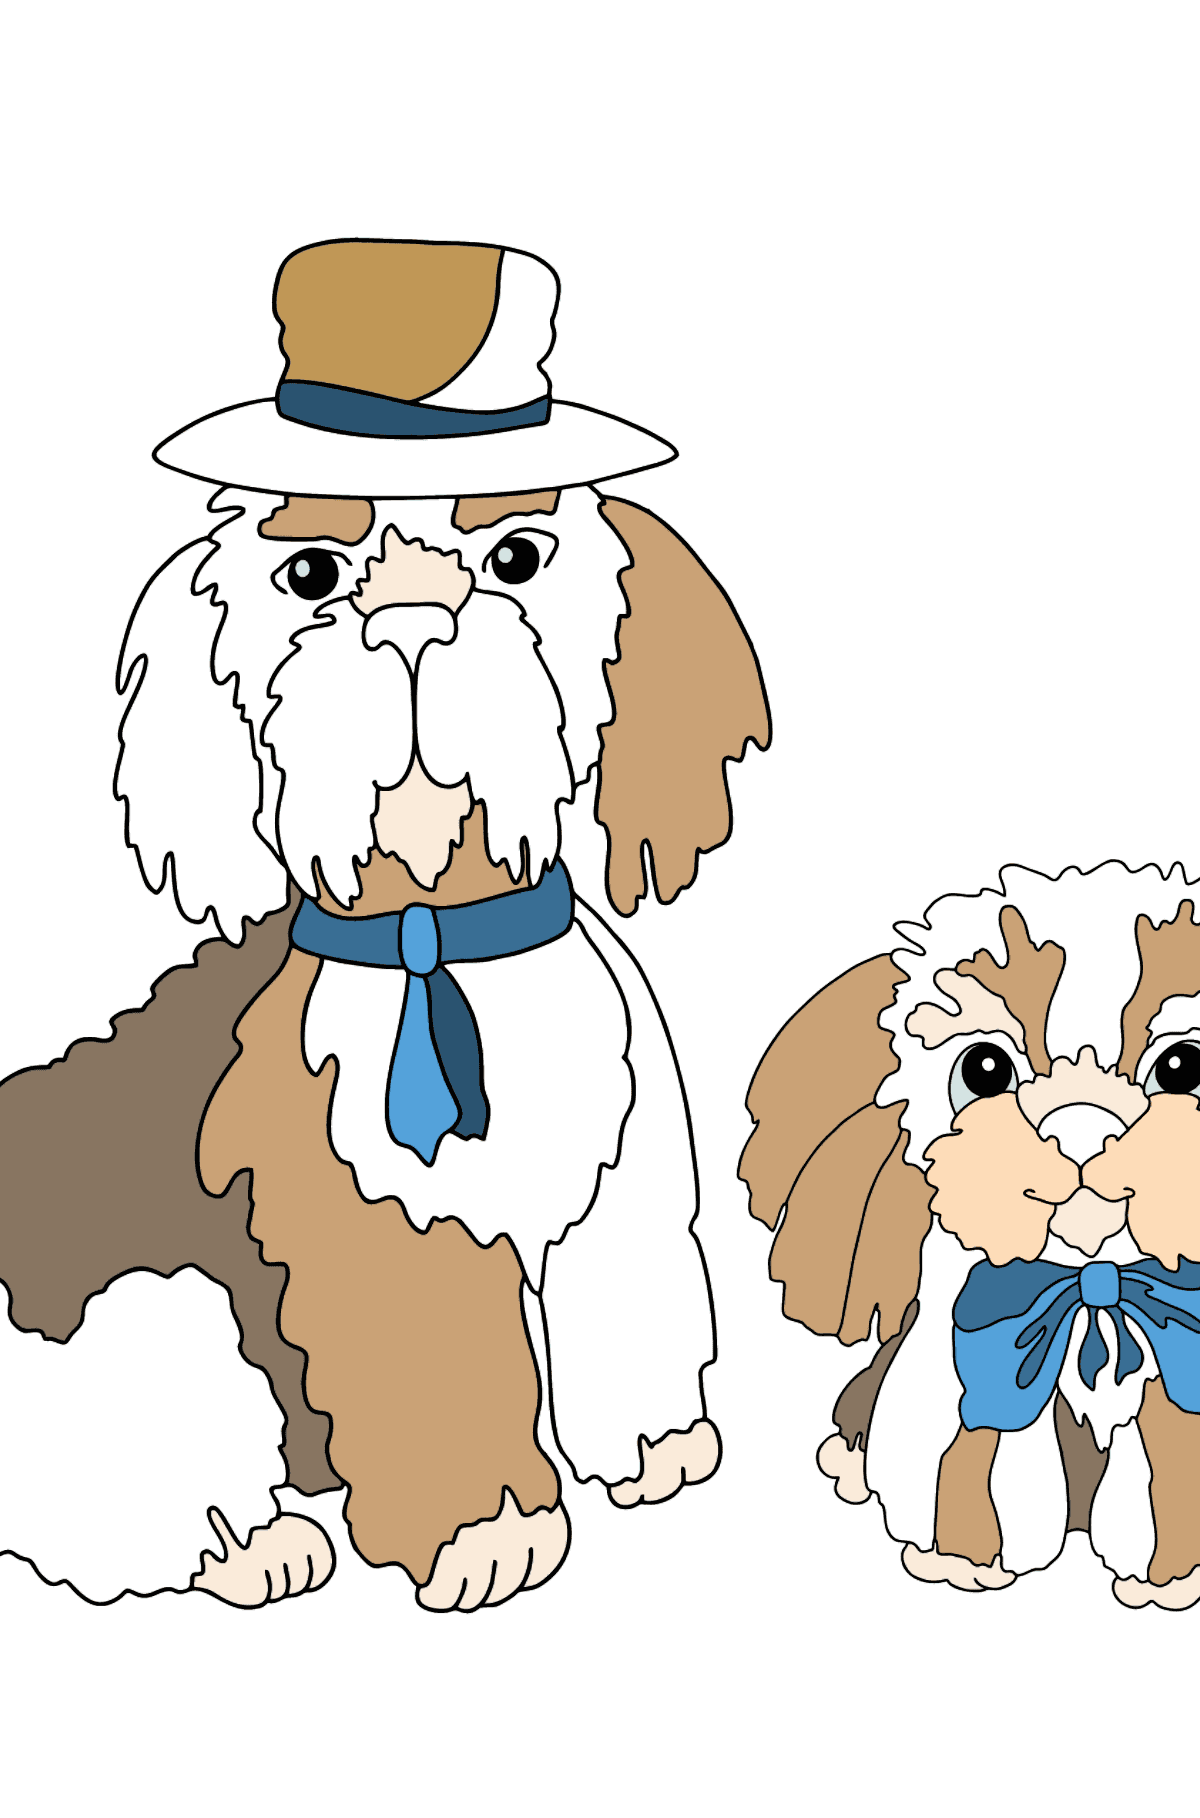 Coloring Page - Dogs are Sitting Wearing Hats - Coloring Pages for Kids